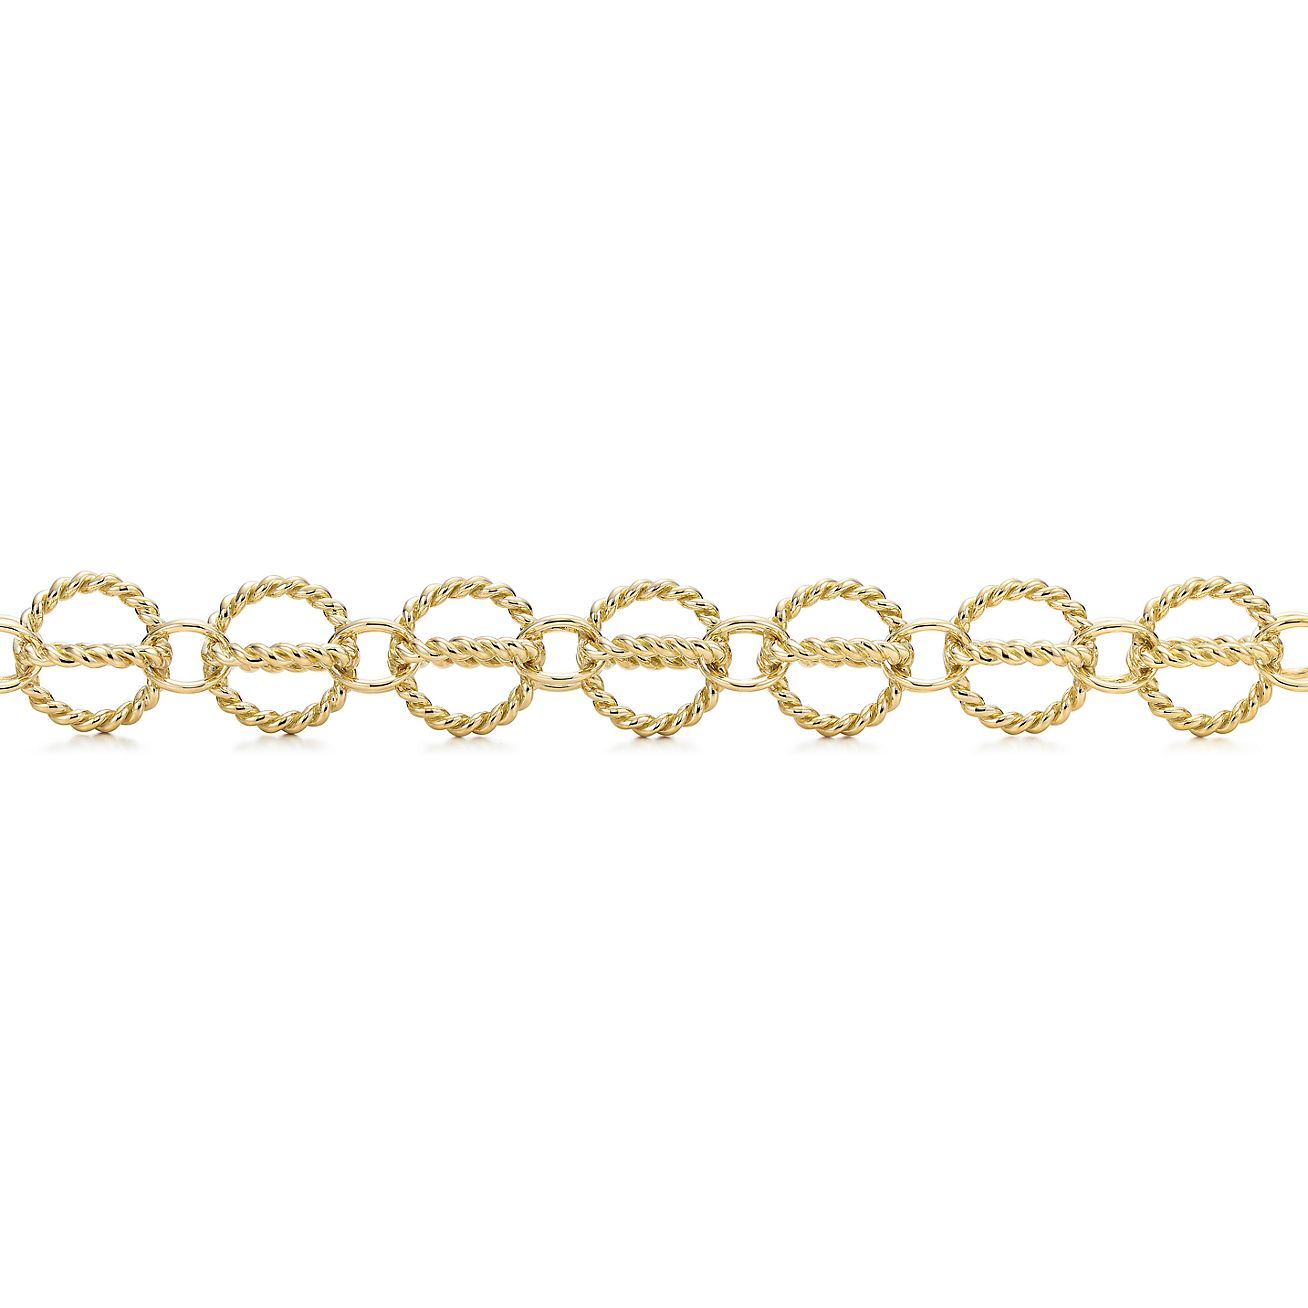 Jean Schlumberger by Tiffany Circle Rope Bracelet